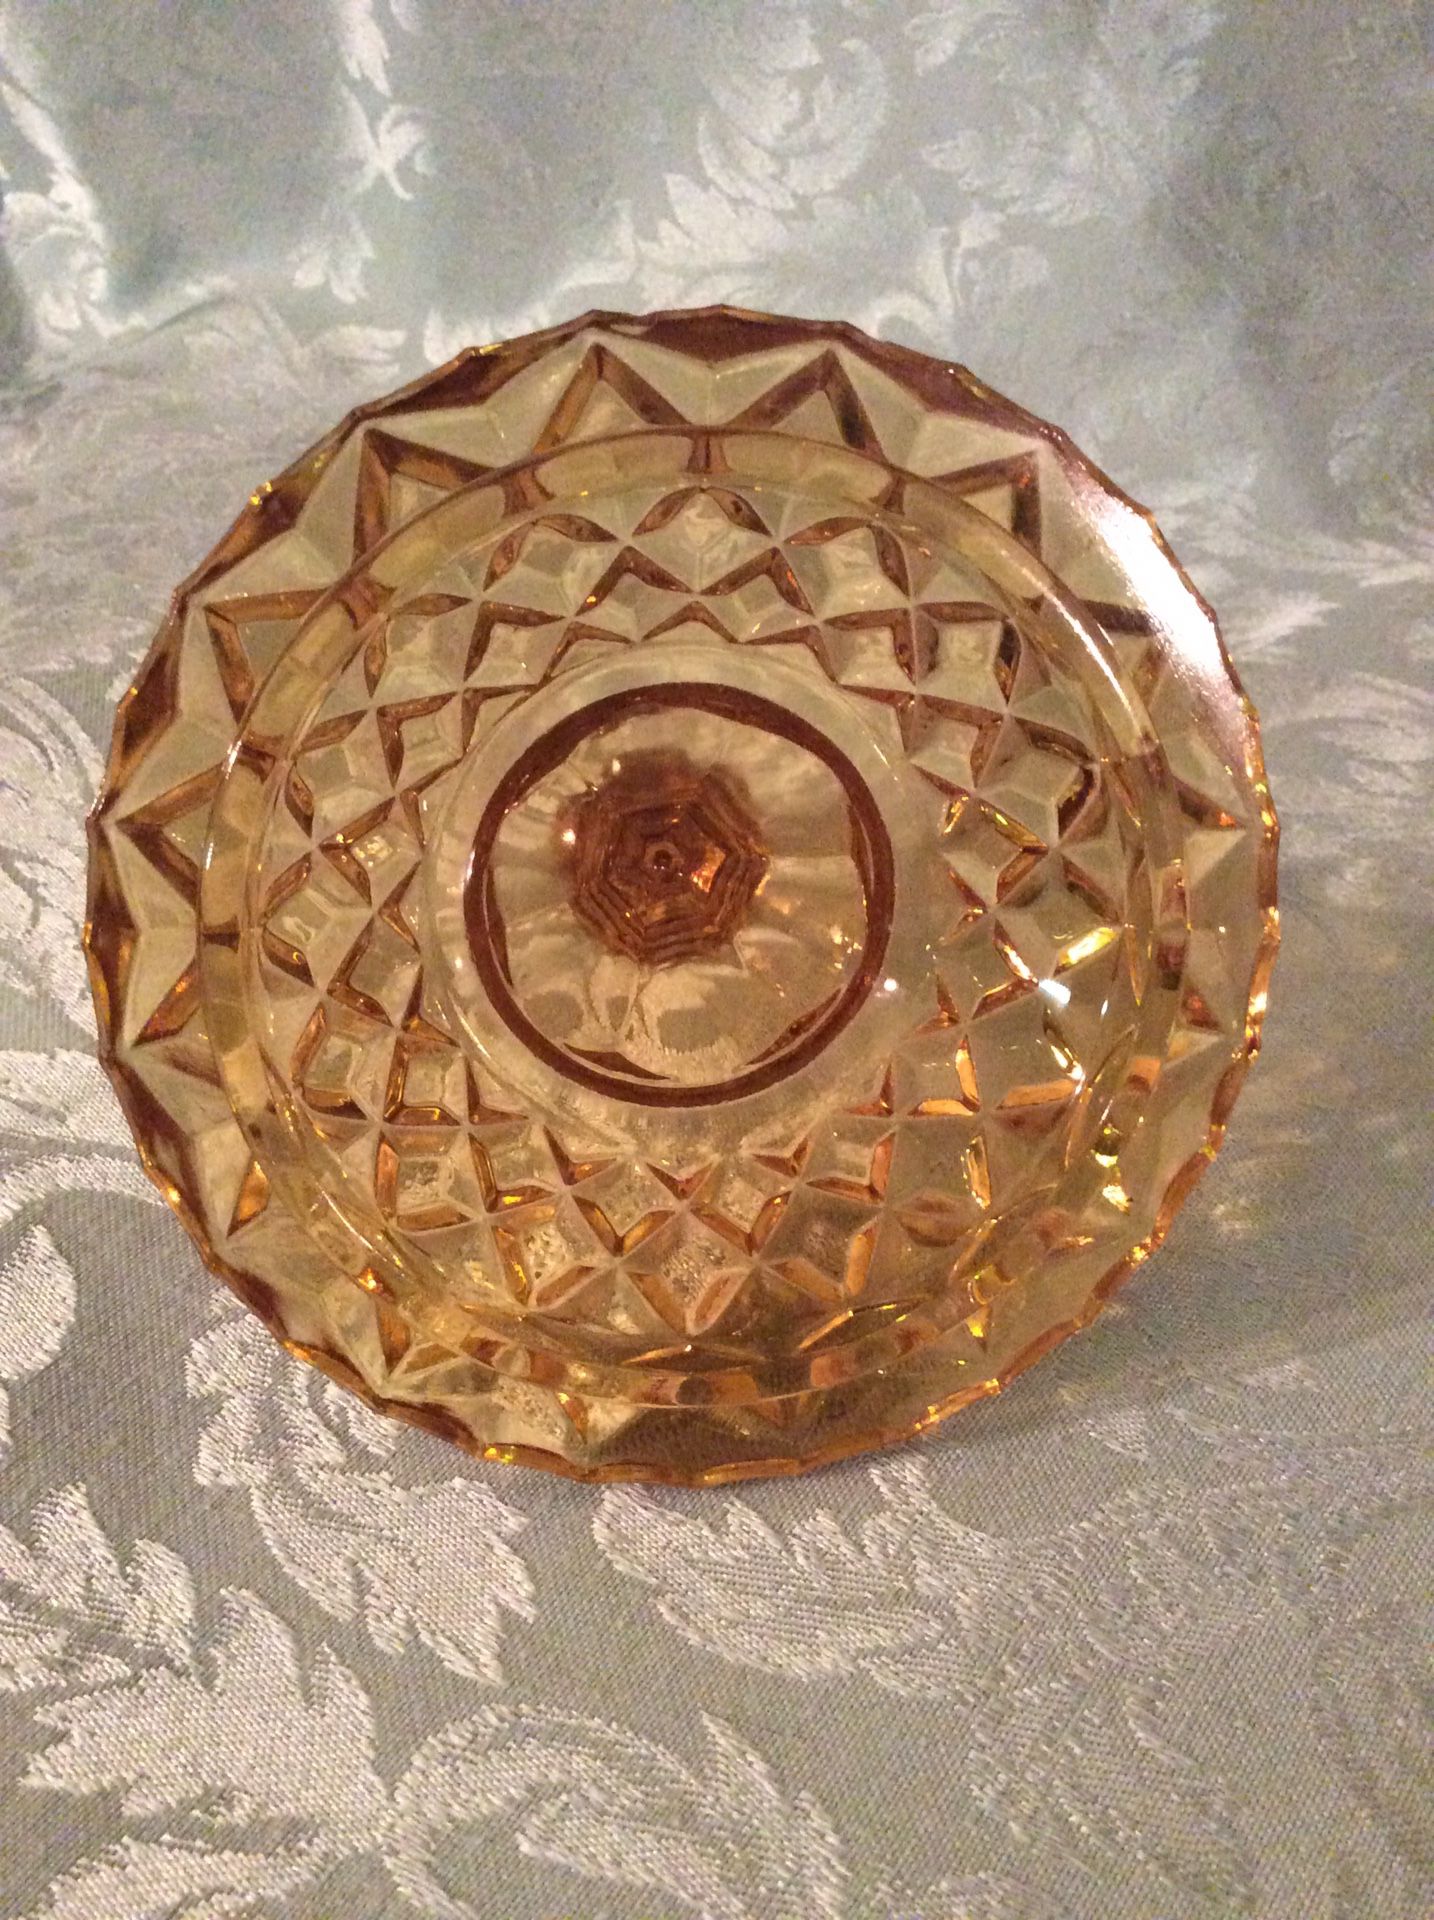 Lovely Amber-Colored Glass Candy Dish